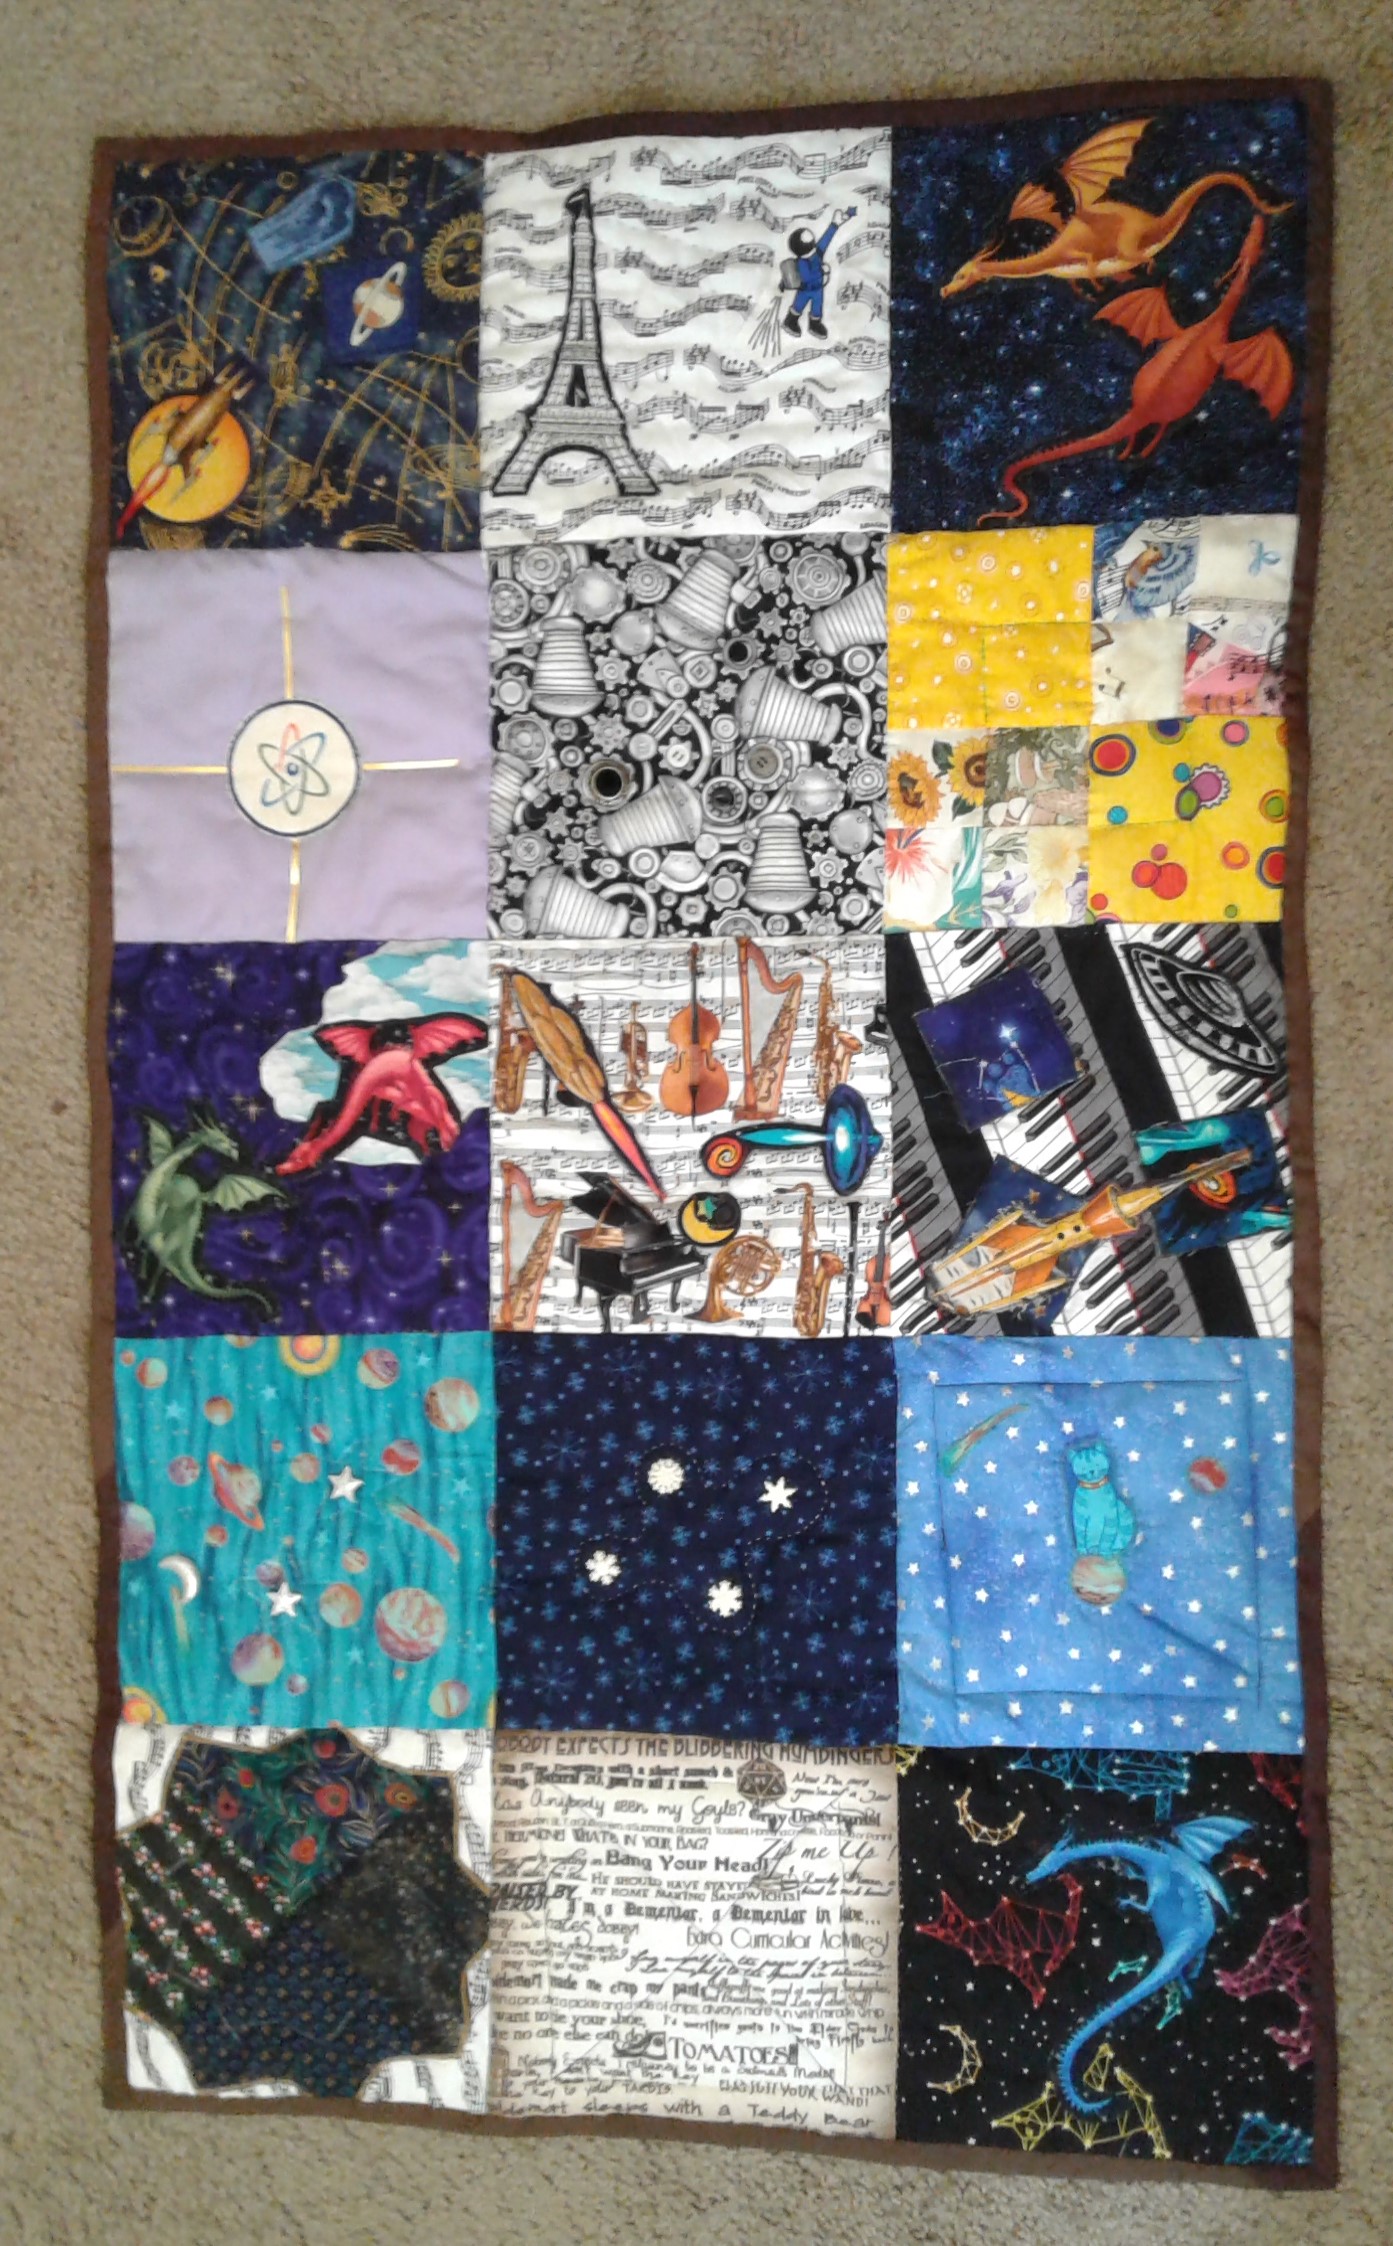 2018 quilt completed